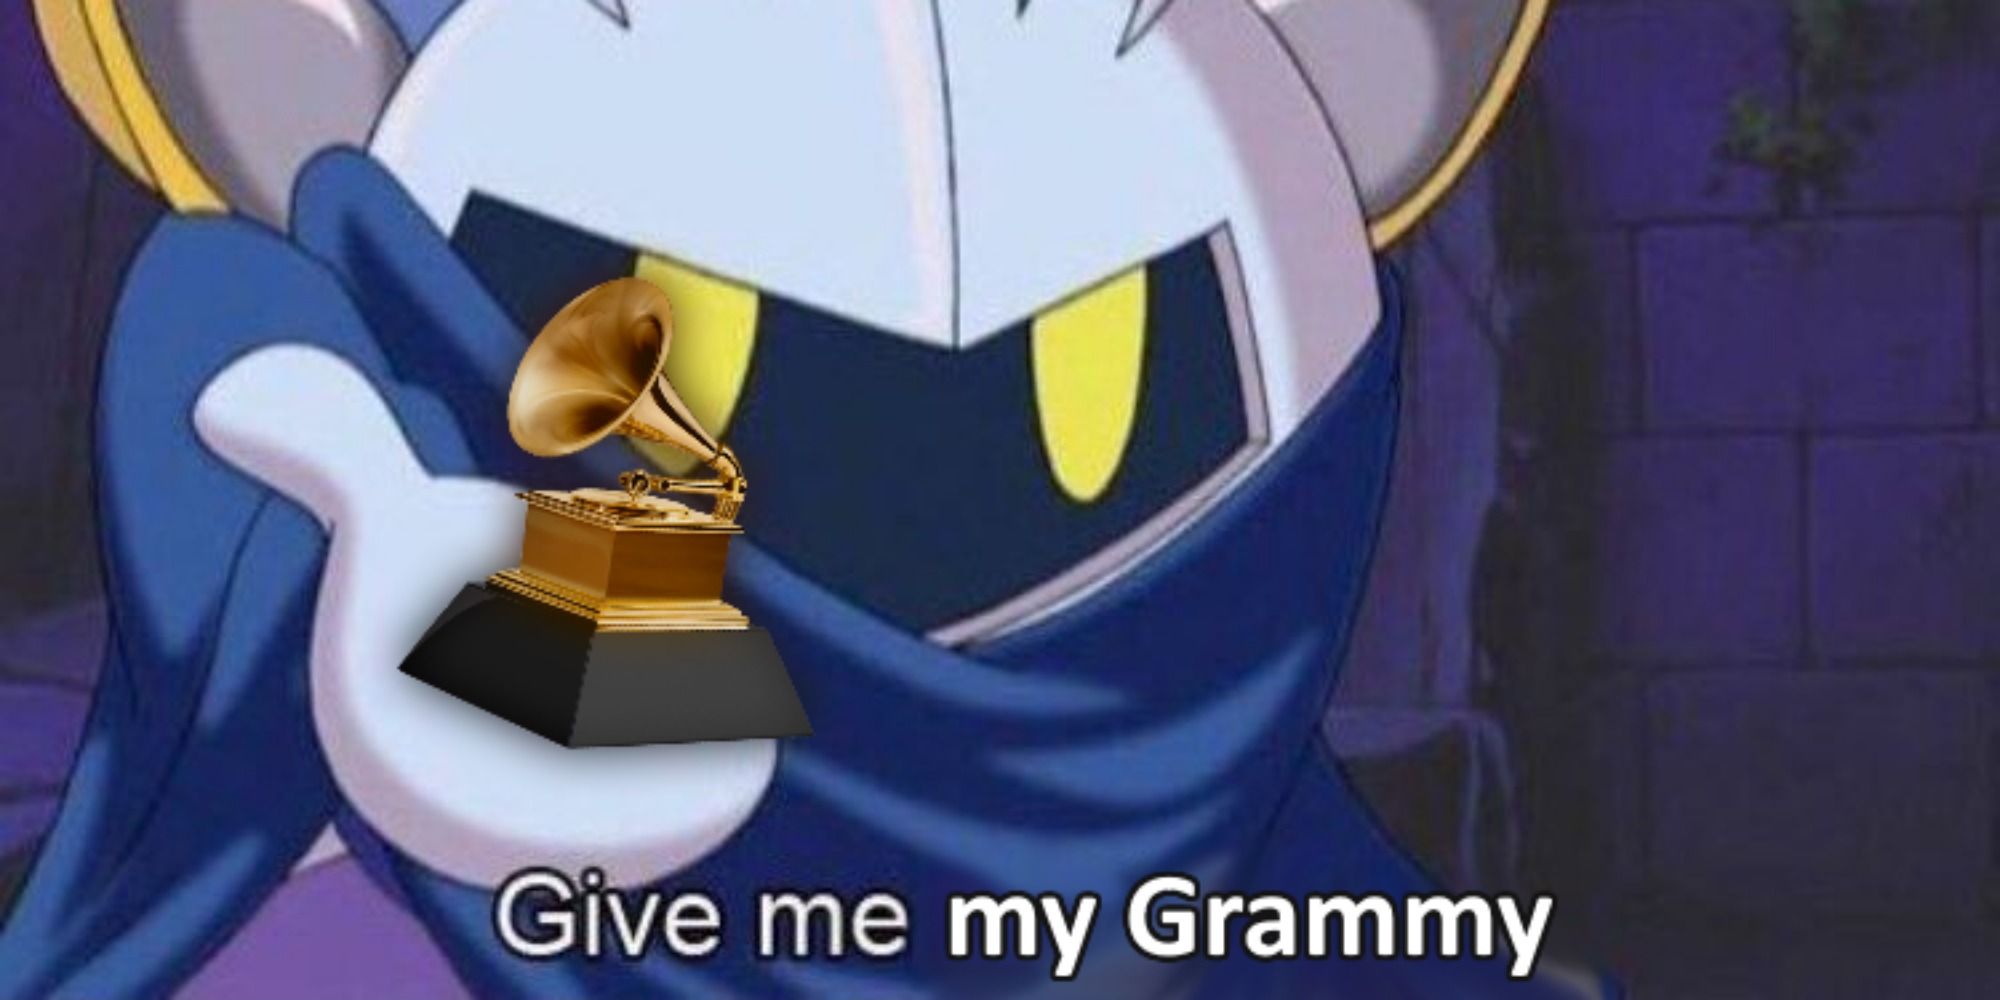 Meta Knight holds a Grammy in his right palm. The caption reads: "Give me my Grammy."